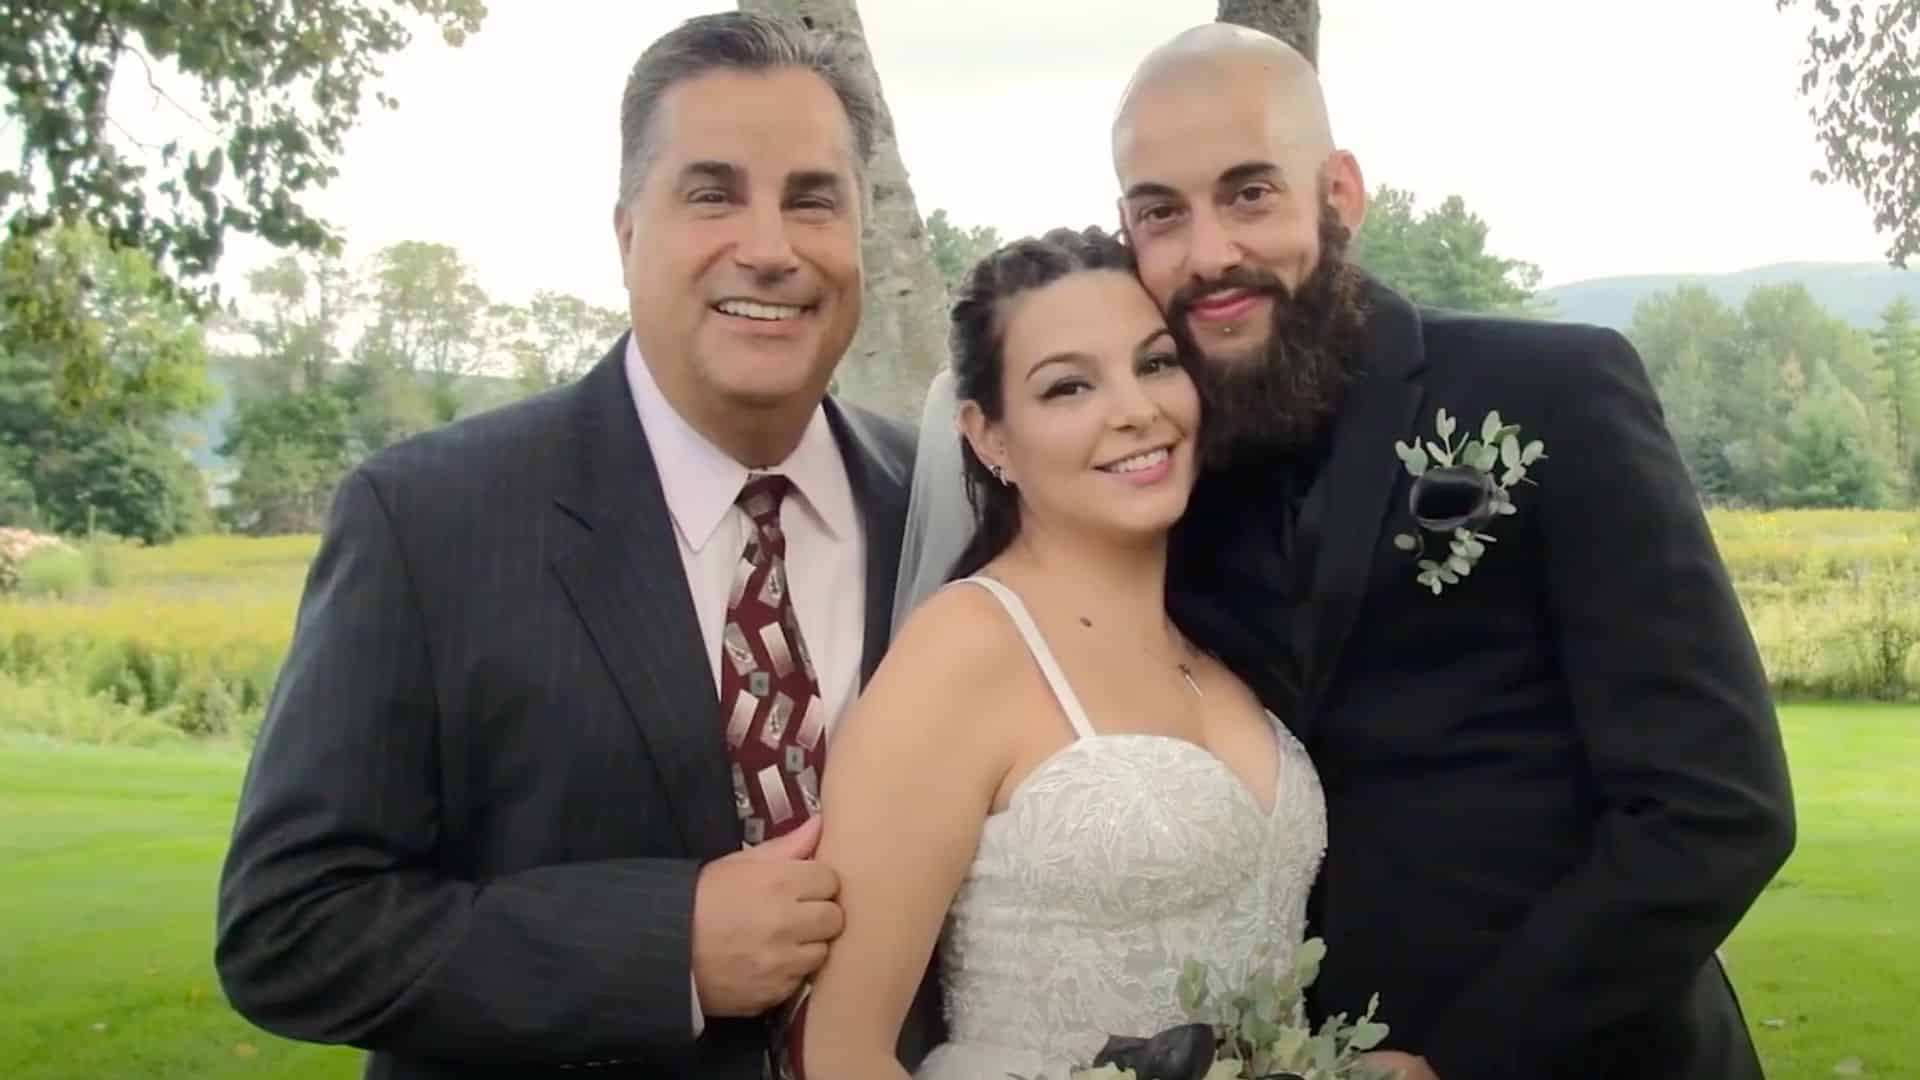 Doug Bagnasco posing as the officiant with a bridal couple